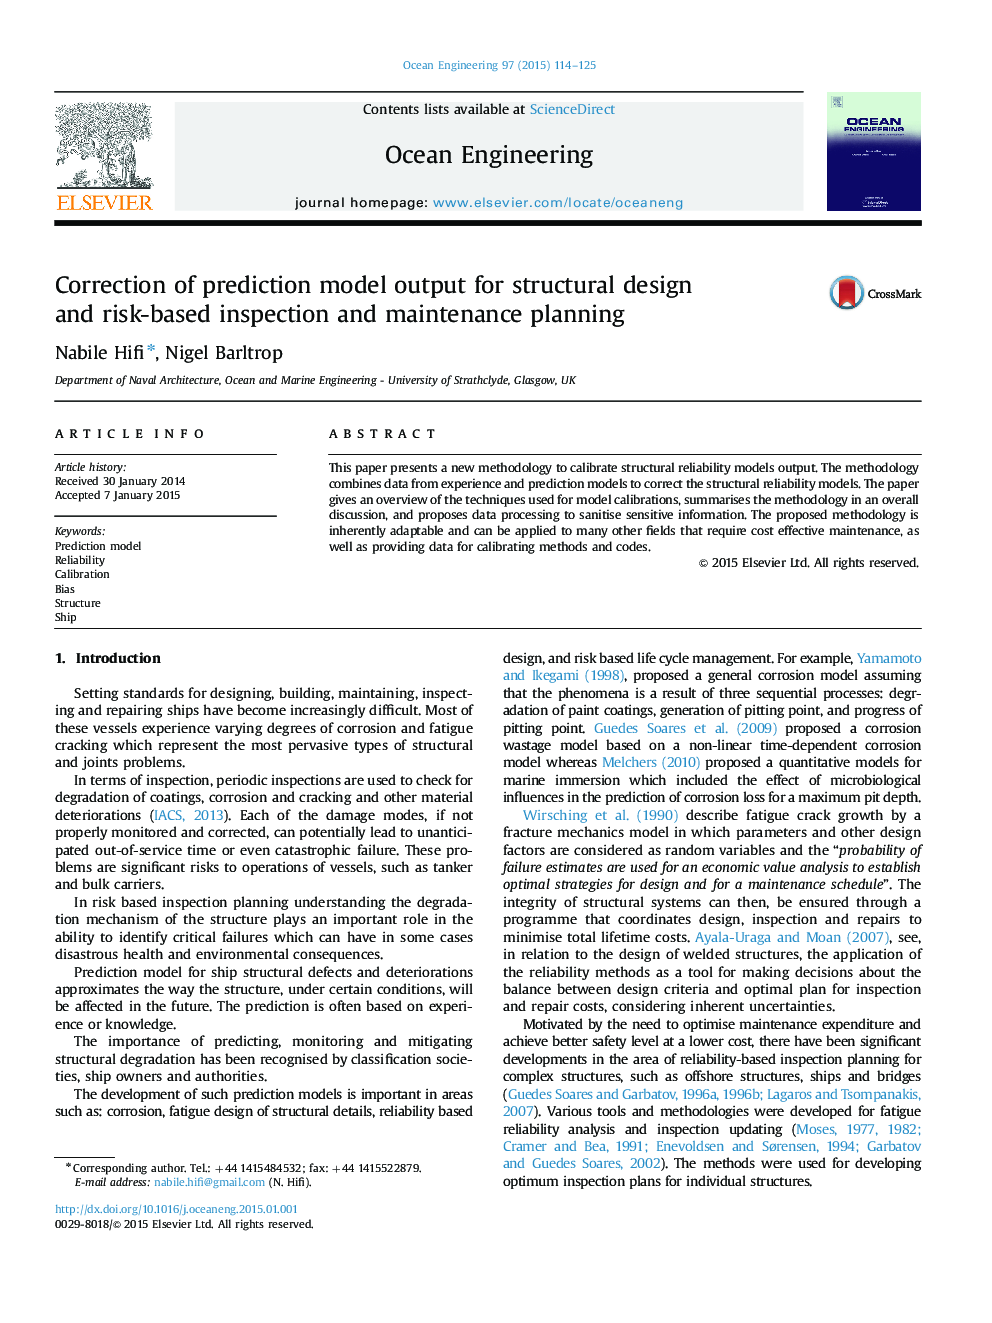 Correction of prediction model output for structural design and risk-based inspection and maintenance planning